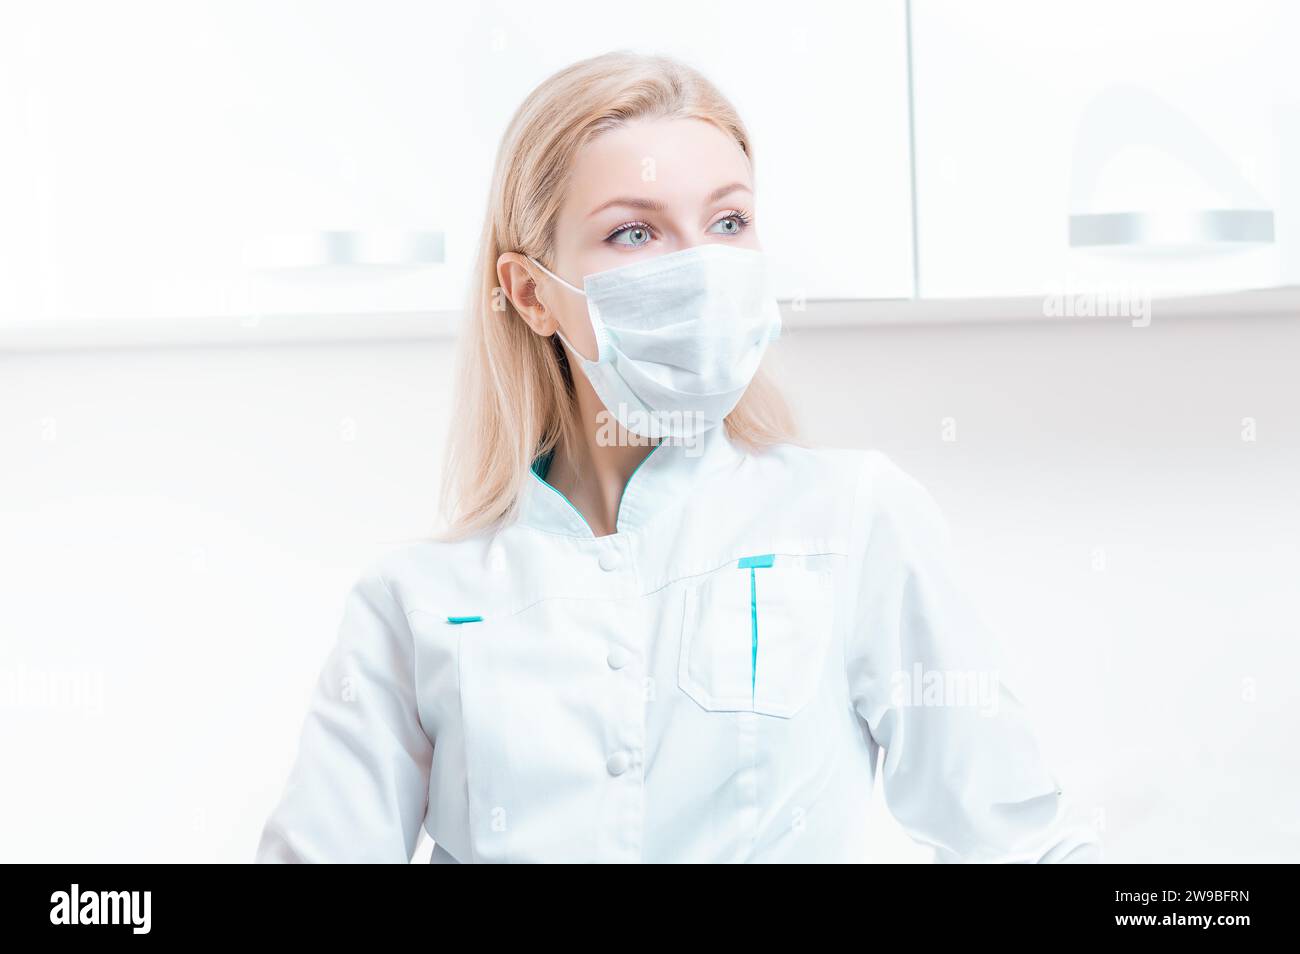 Portrait of a girl in a protective mask. Concept of cosmetology, plastic surgery, beauty industry. Mixed media Stock Photo